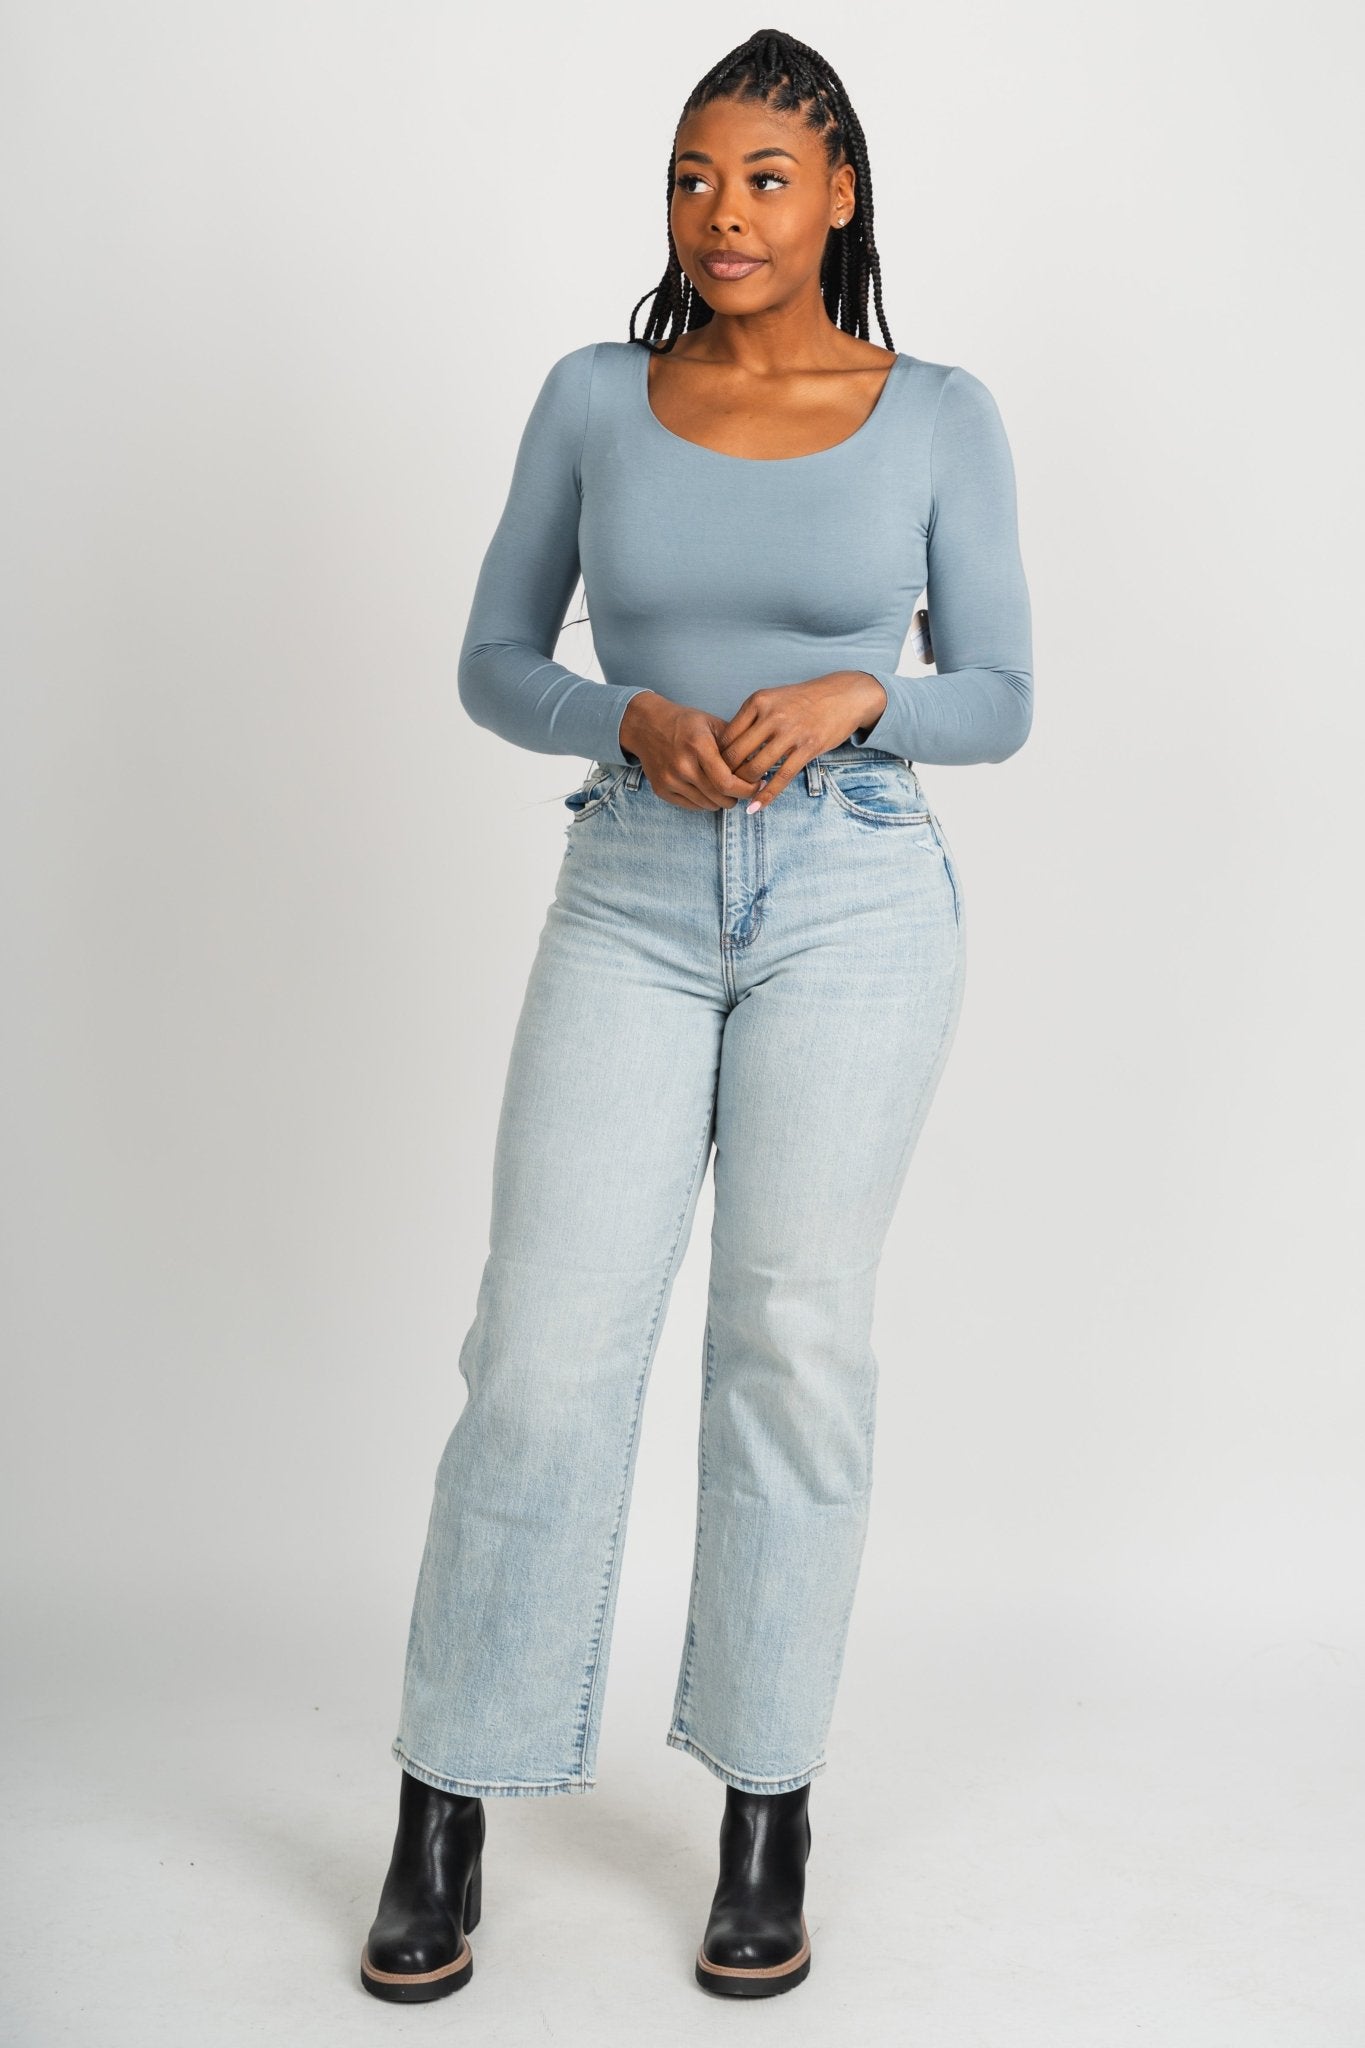 Long sleeve round neck bodysuit ash blue - Trendy bodysuit - Fashion Bodysuits at Lush Fashion Lounge Boutique in Oklahoma City